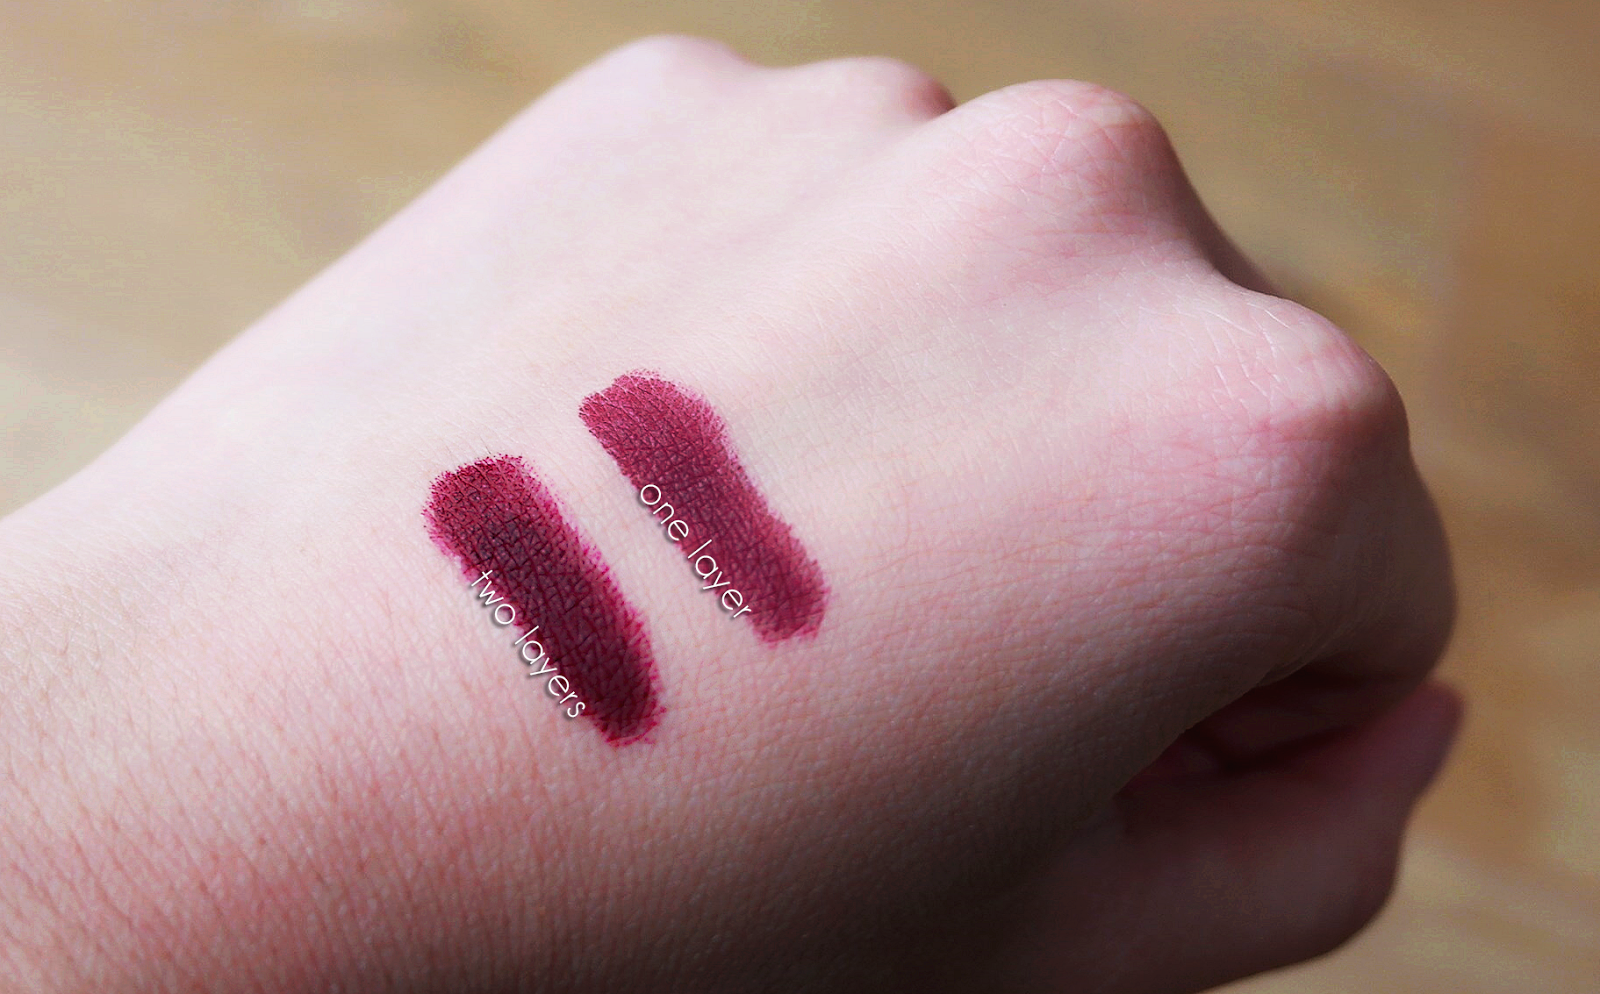 Review Mac Matte Lipstick In Diva With Swatches And Photos M E L I M U N C H I